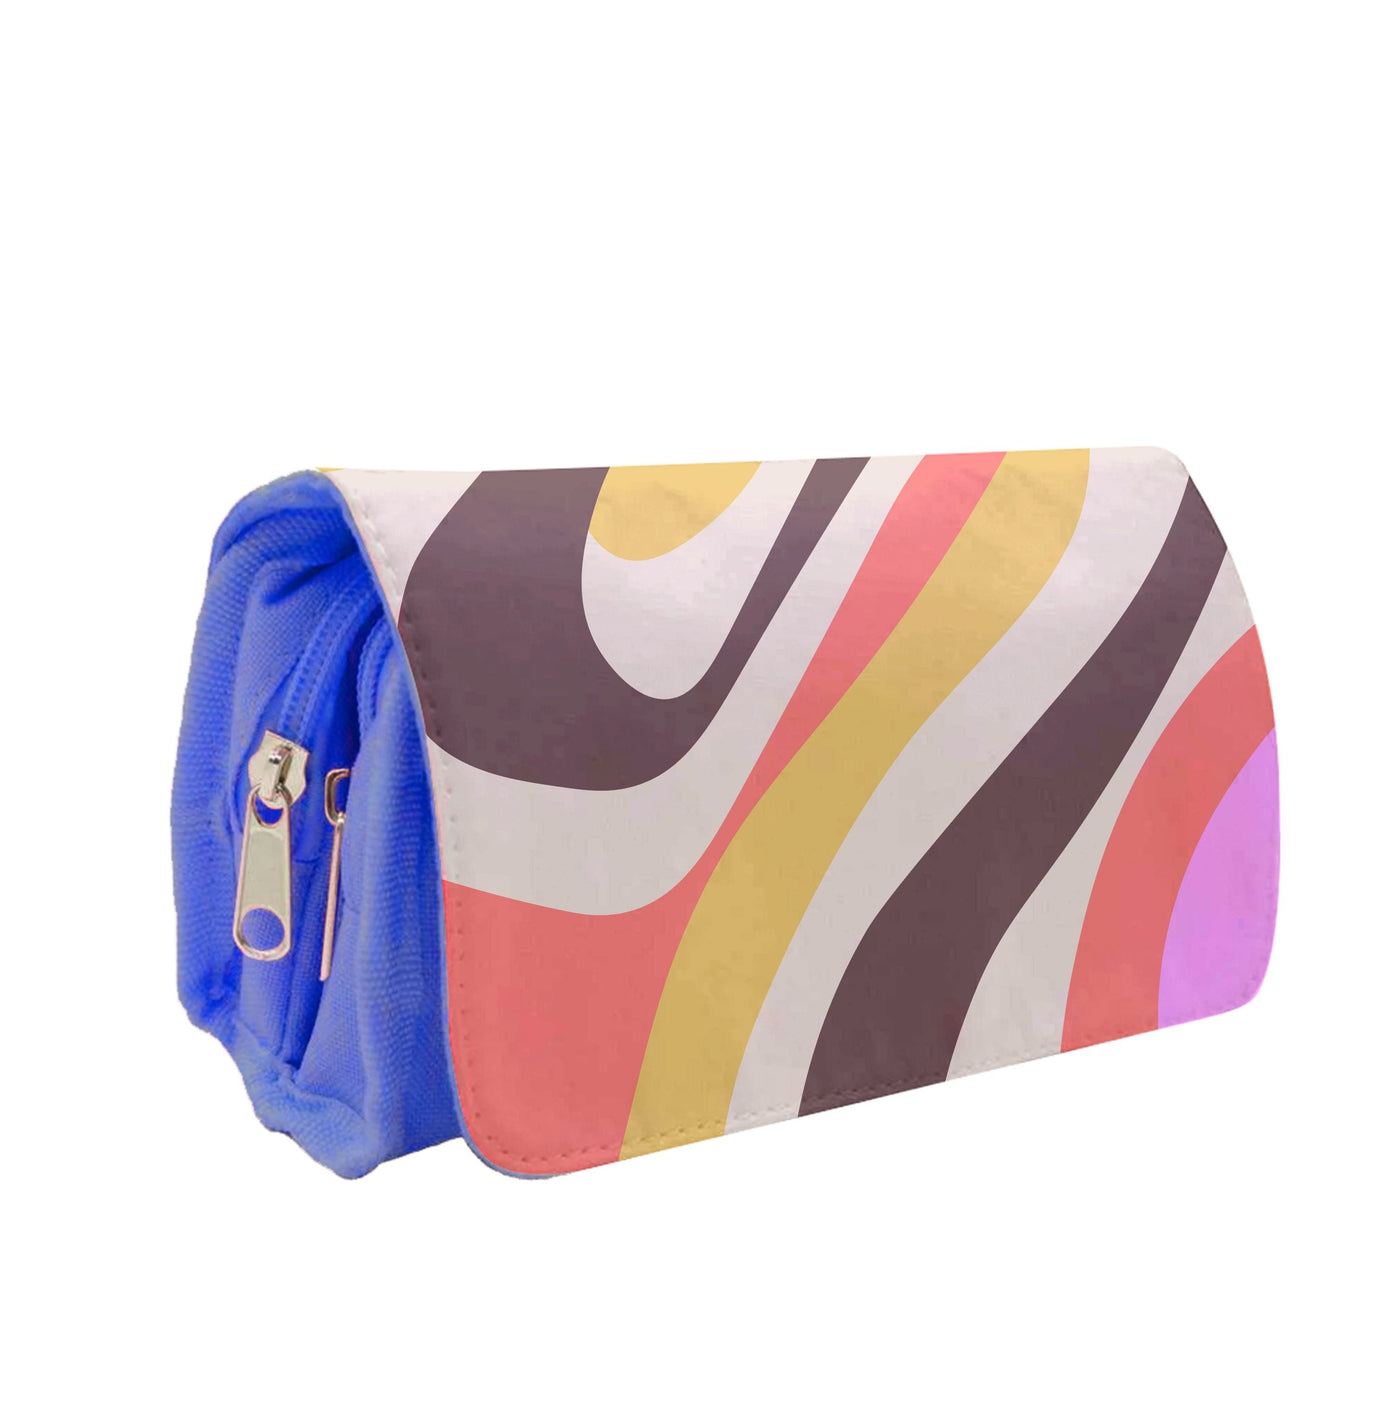 Abstract Patterns 29 Pencil Case